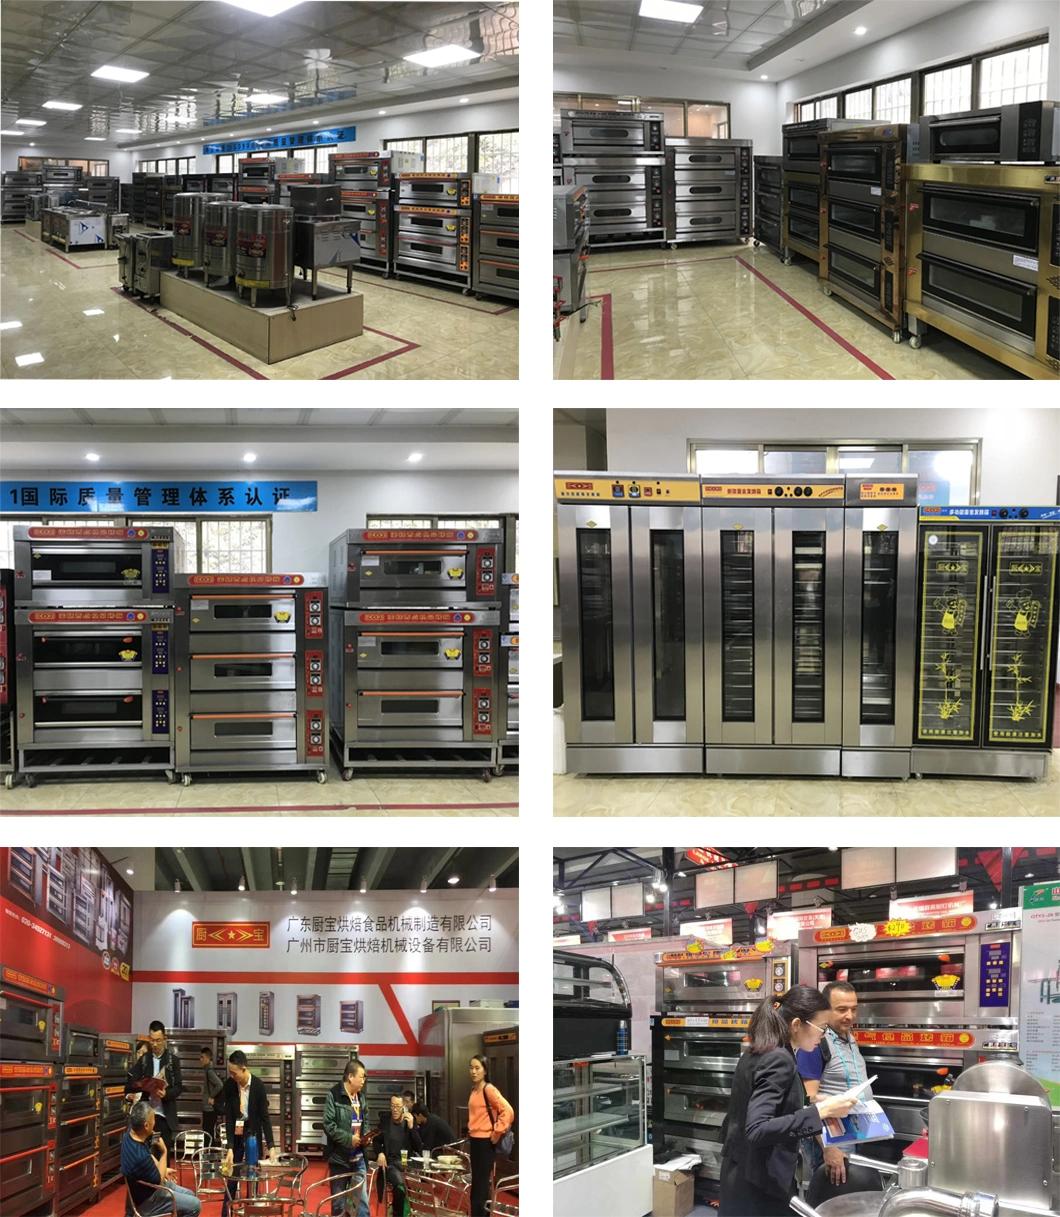 Commercial Restaurant Kitchen 1 Deck 2 Trays Gas Oven for Baking Equipment Bakery Machine Food Equipment